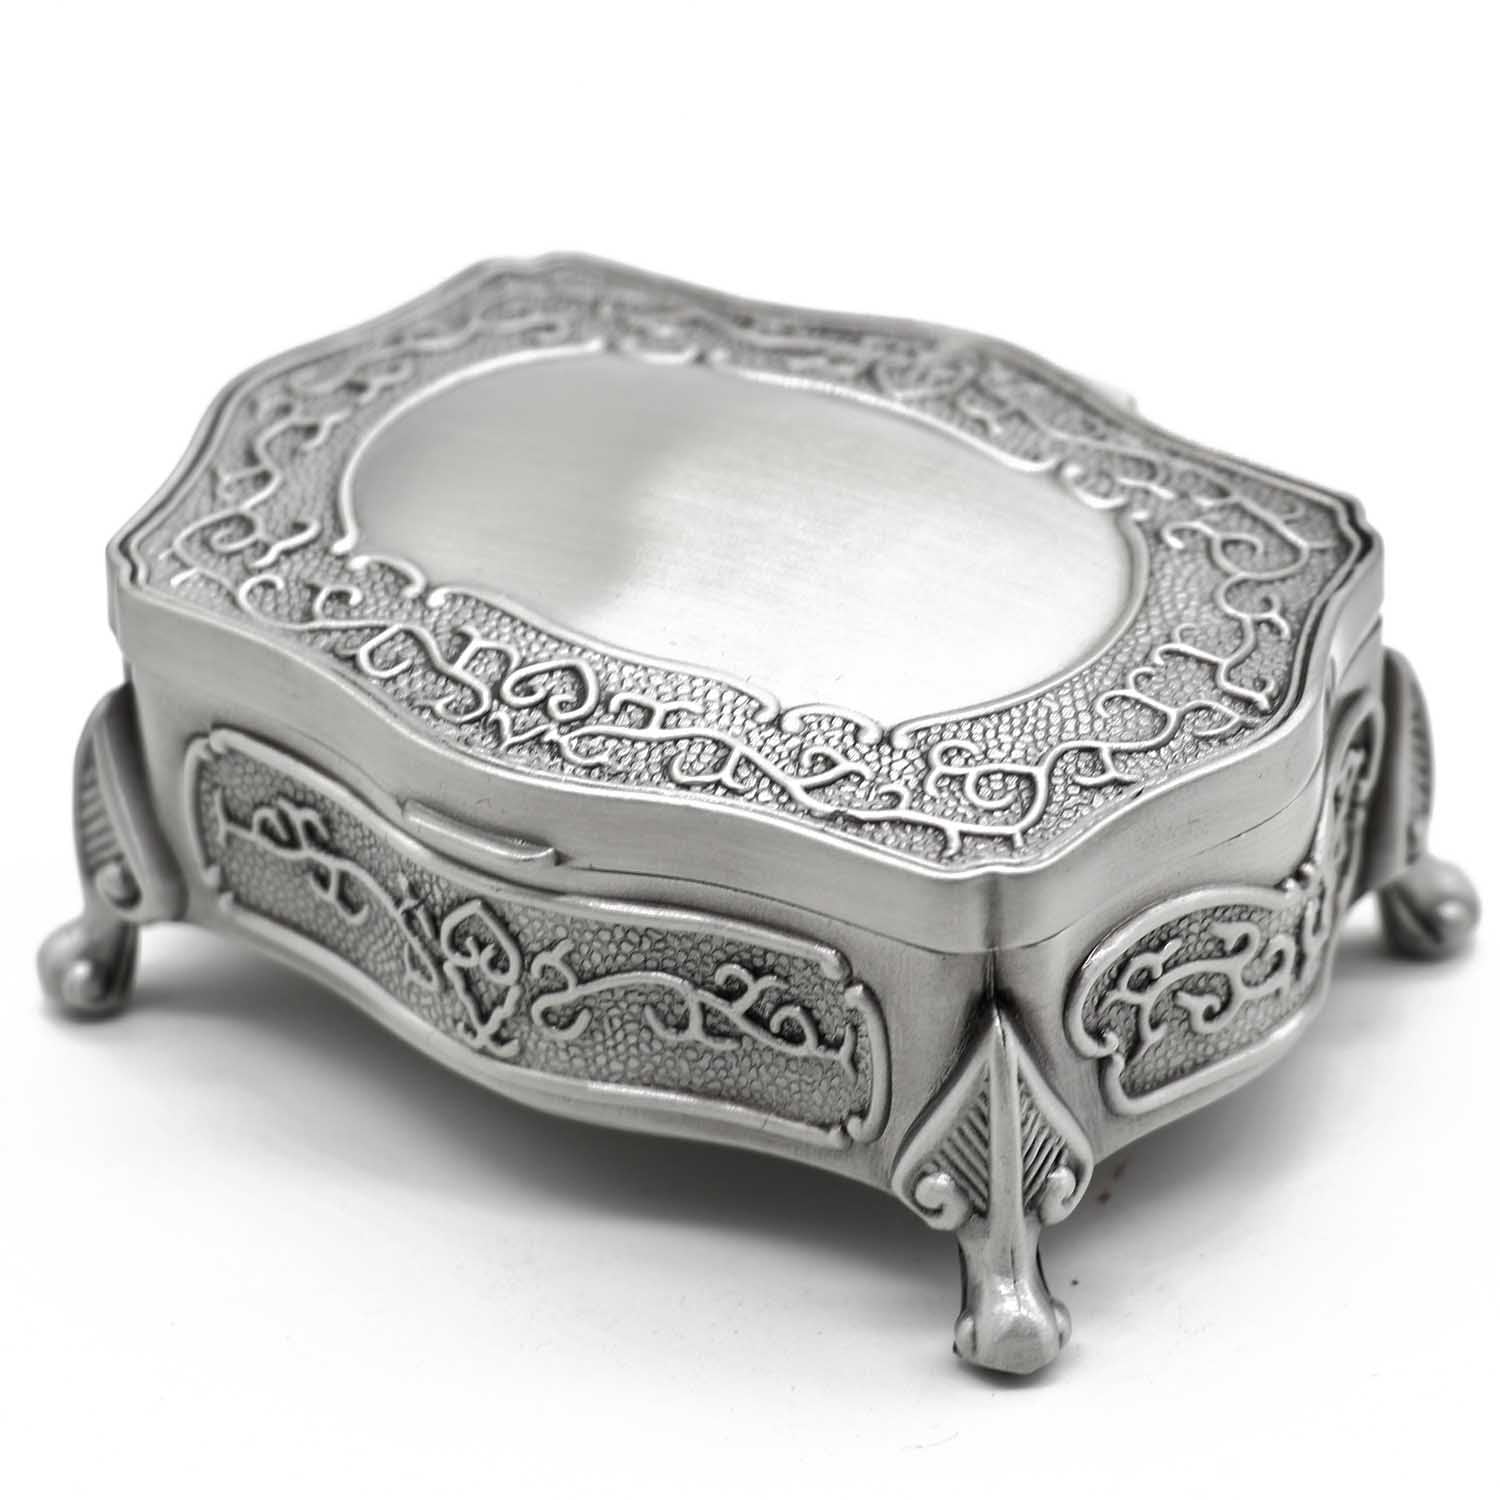 AVESON Rectangle Vintage Metal Jewelry Box Trinket Gift Box Chest Ring Case for Girls Ladies Women, Small